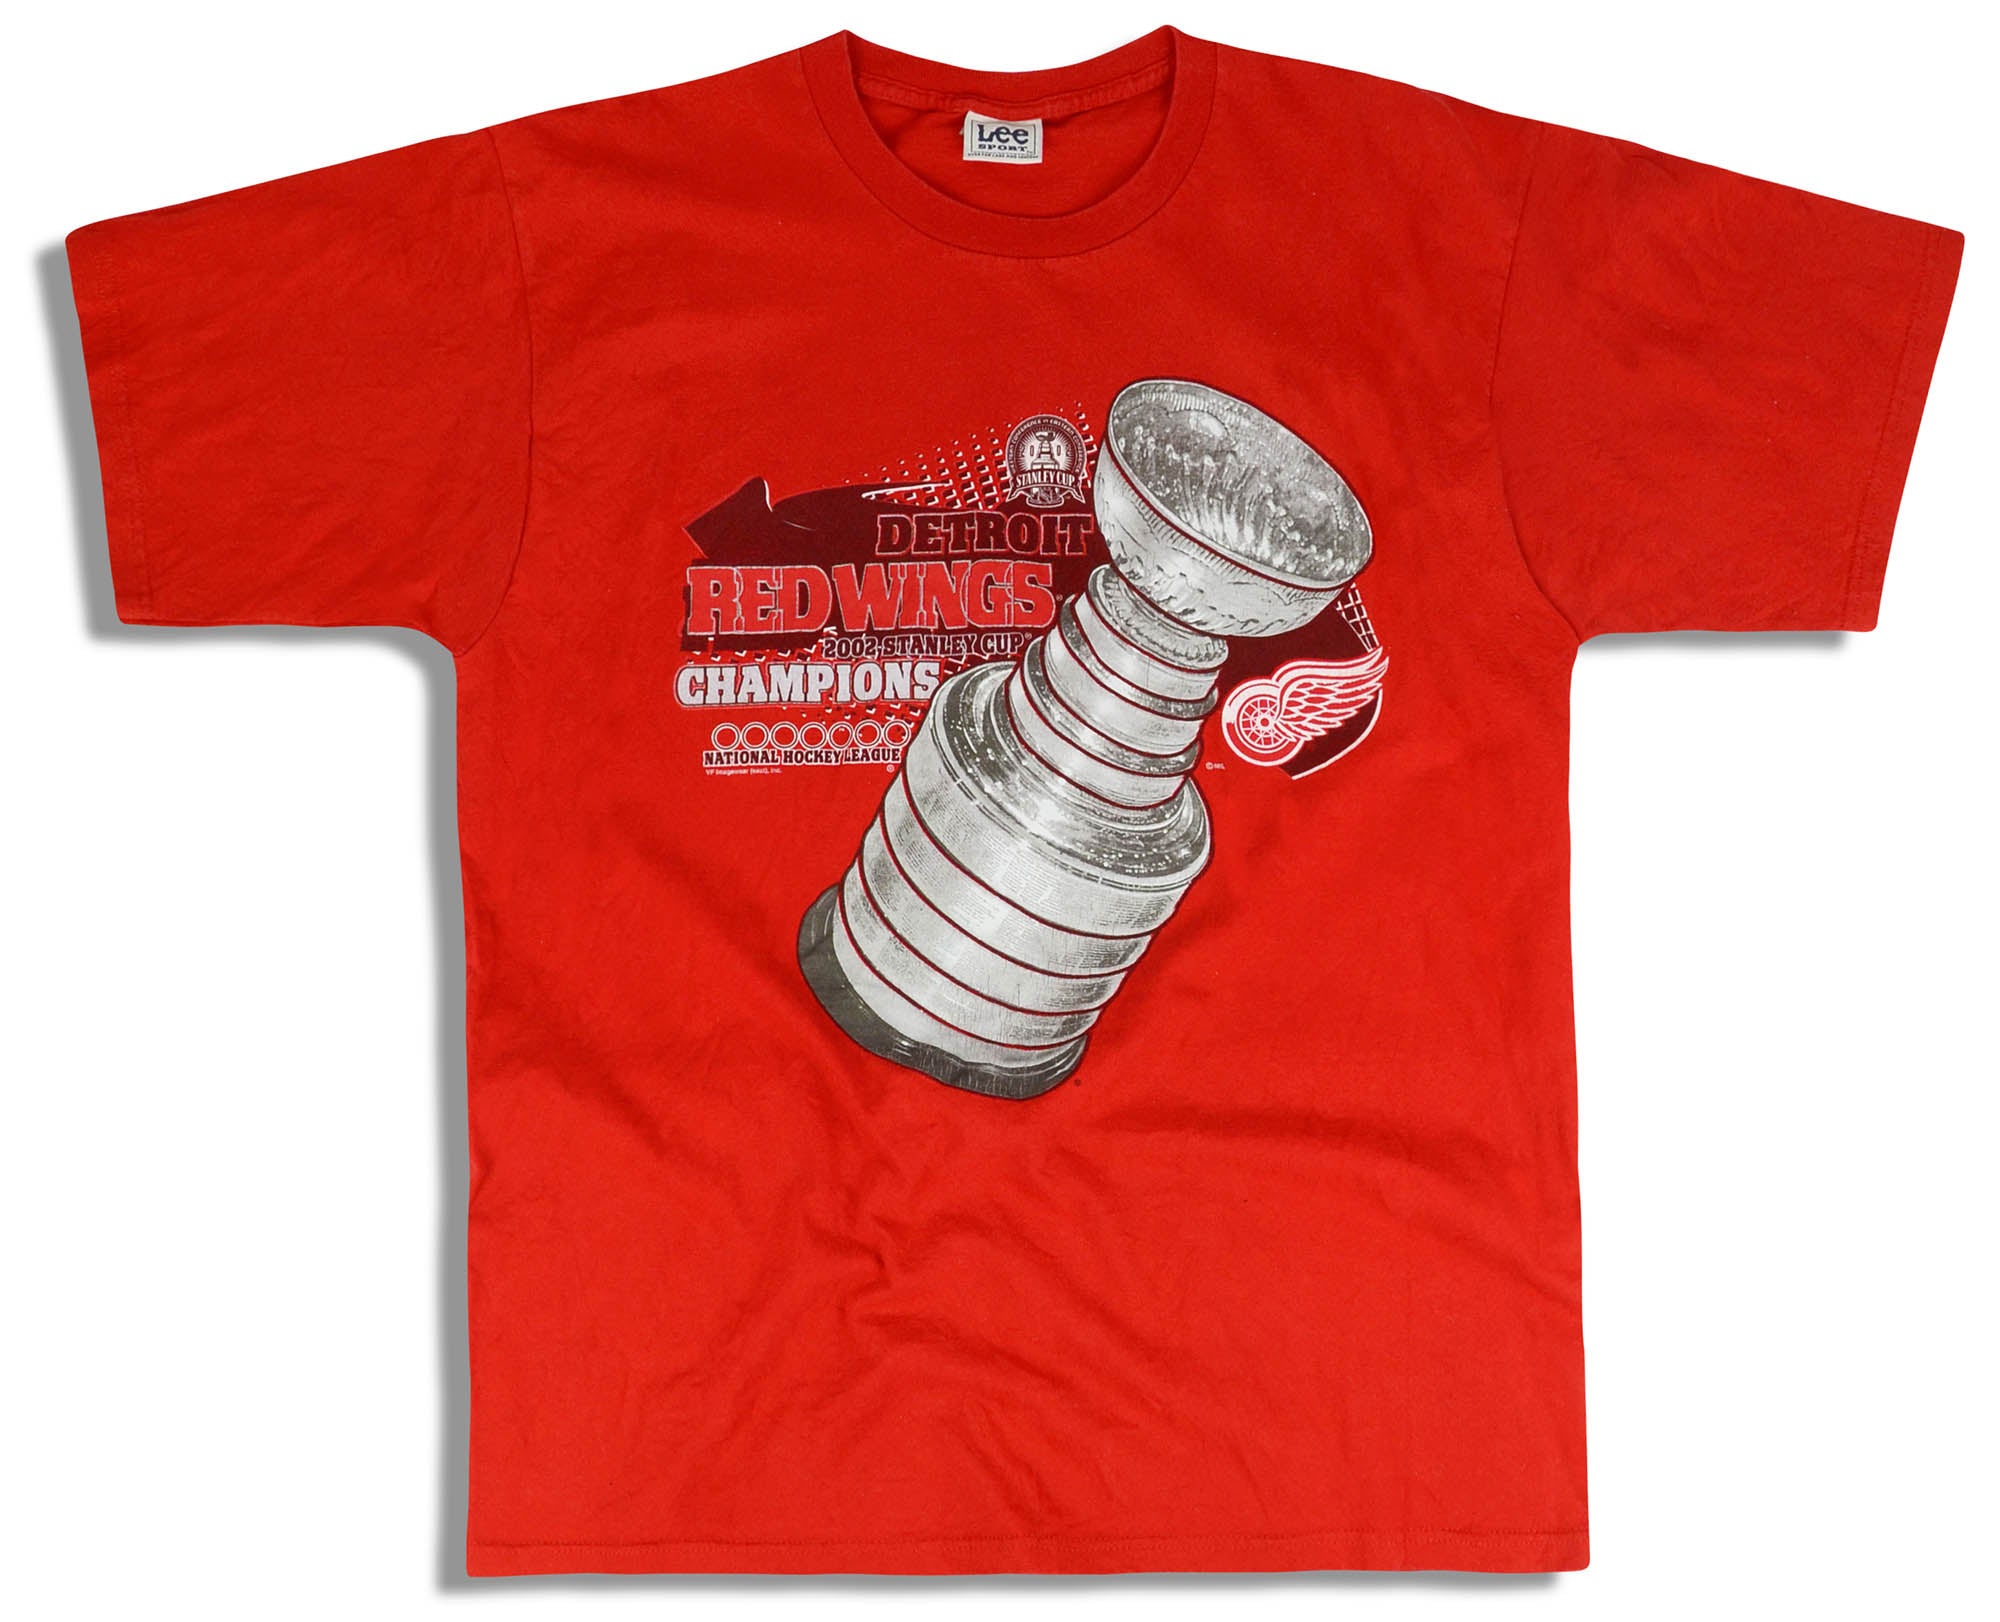 Detroit Red Wings championship jersey